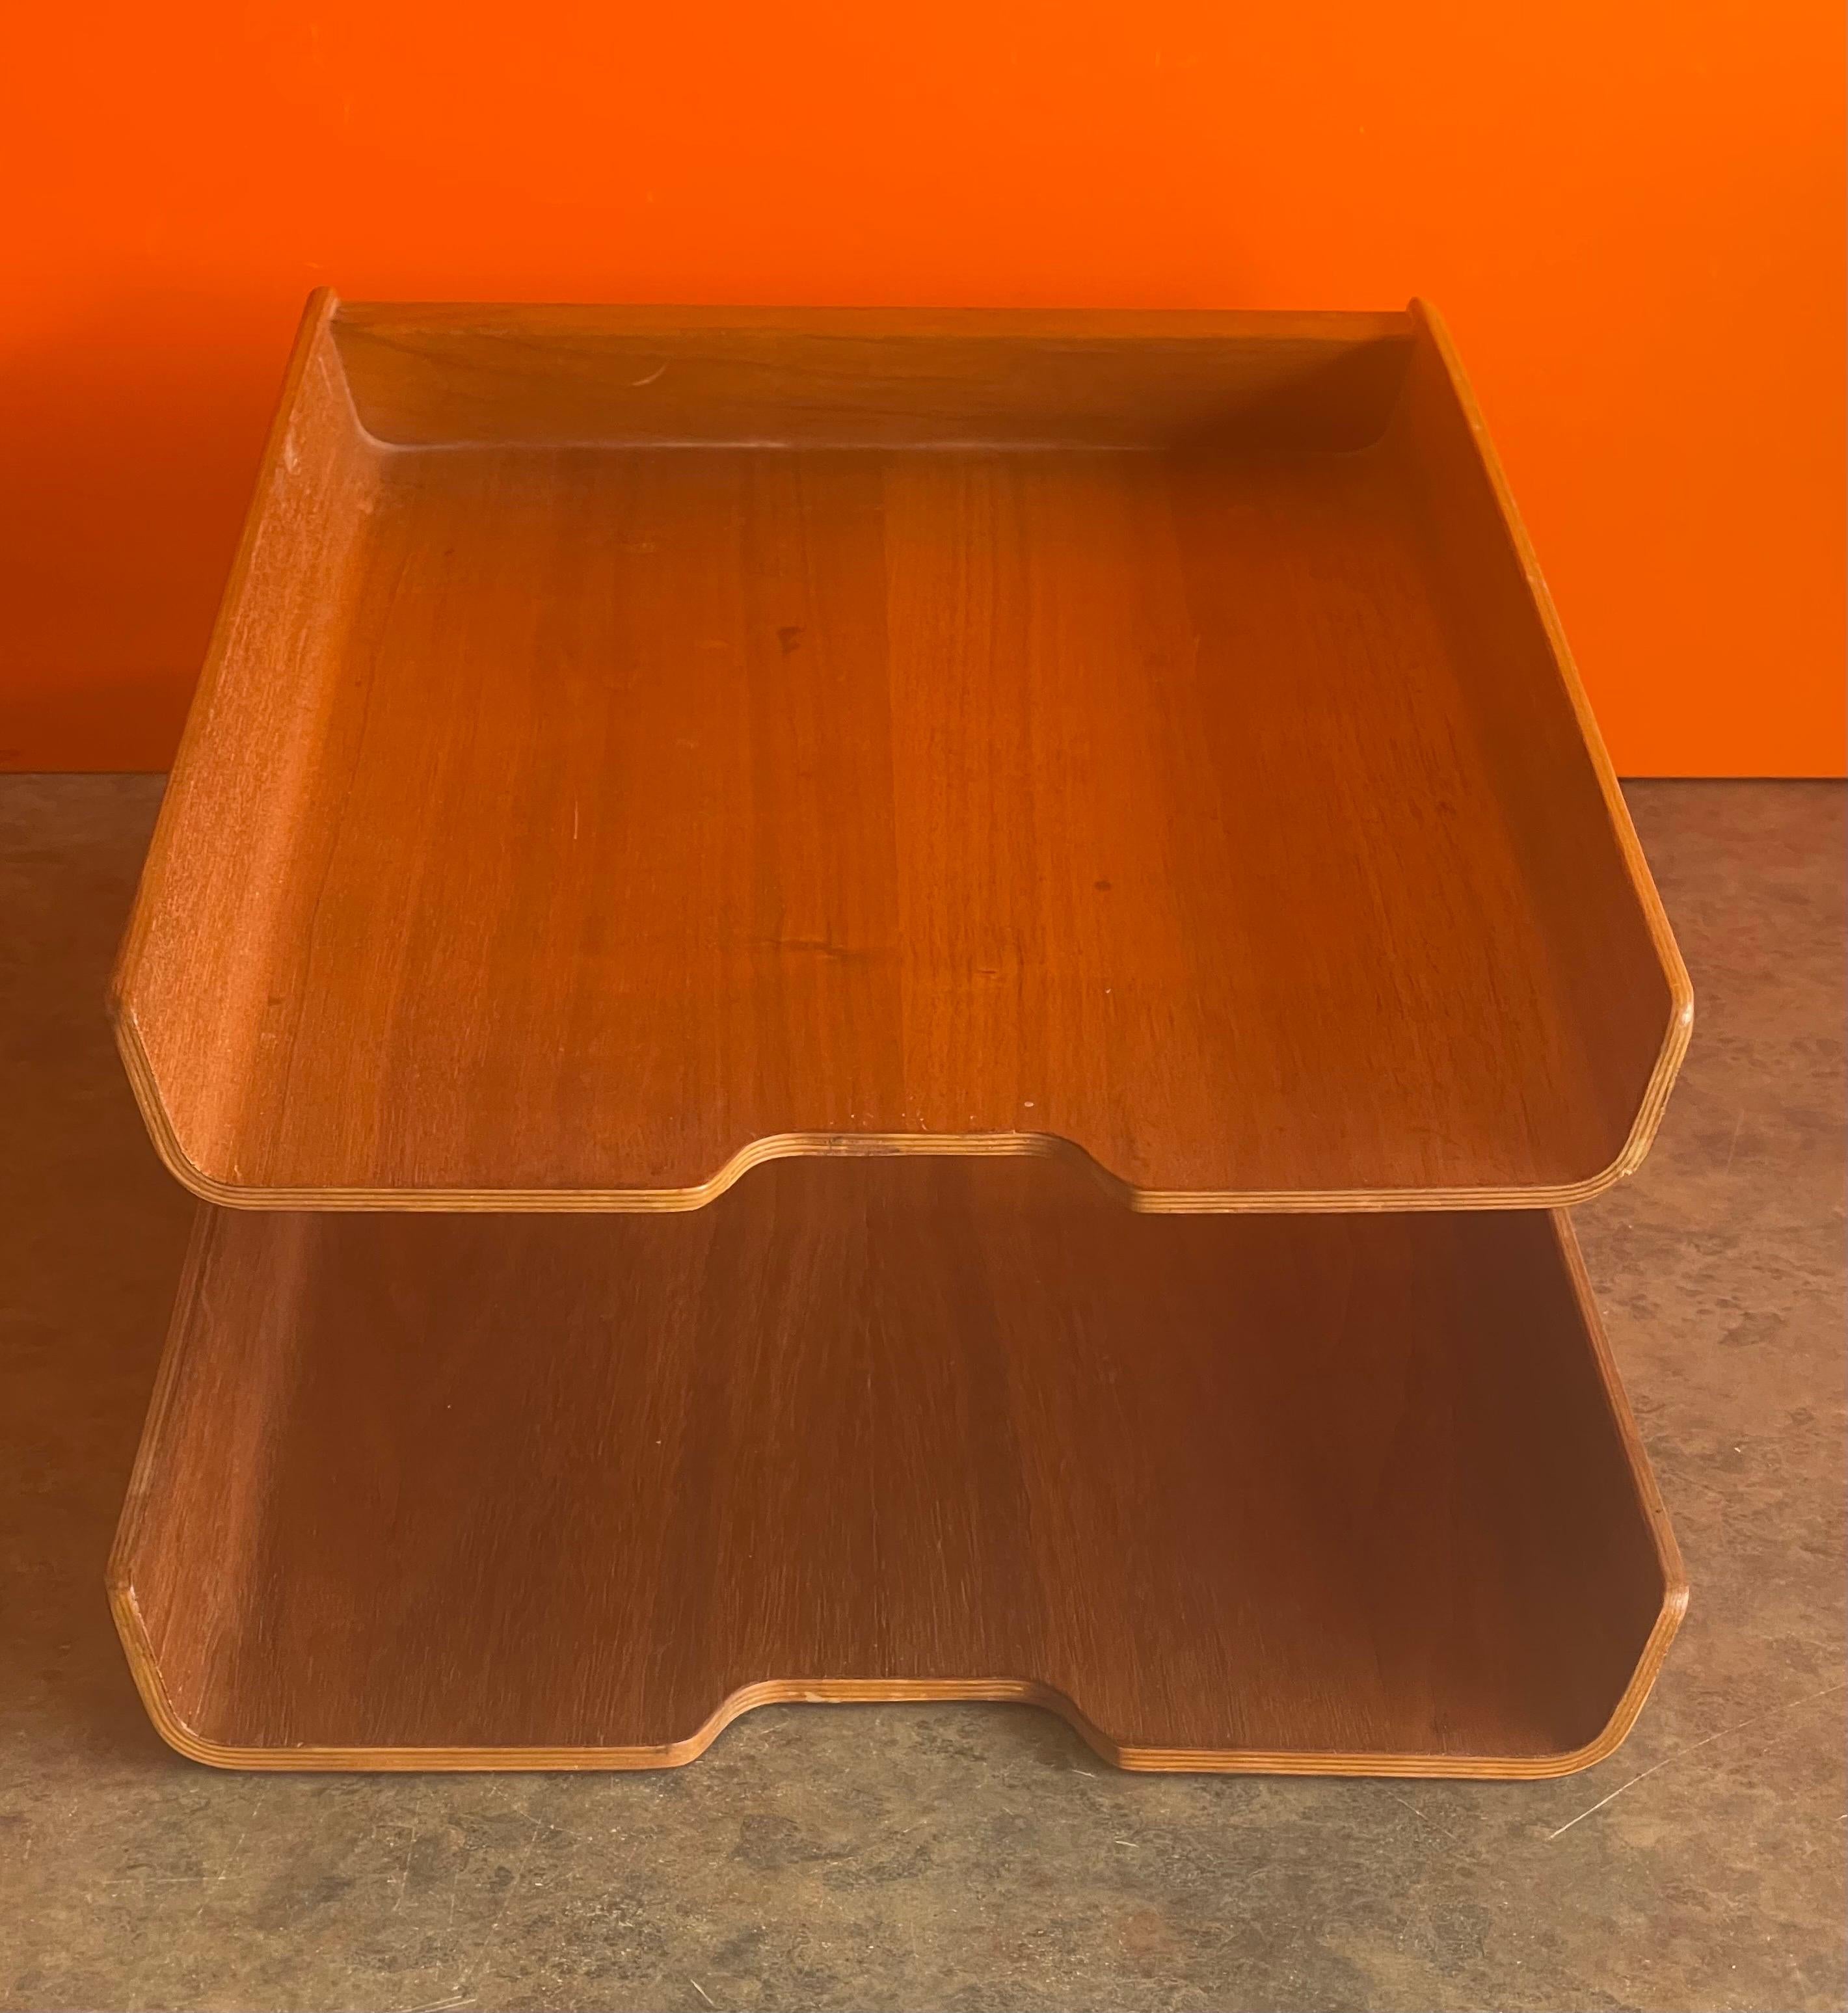 Swedish Molded Teak Plywood Double Letter Tray by Martin Aberg for Rainbow of Sweden